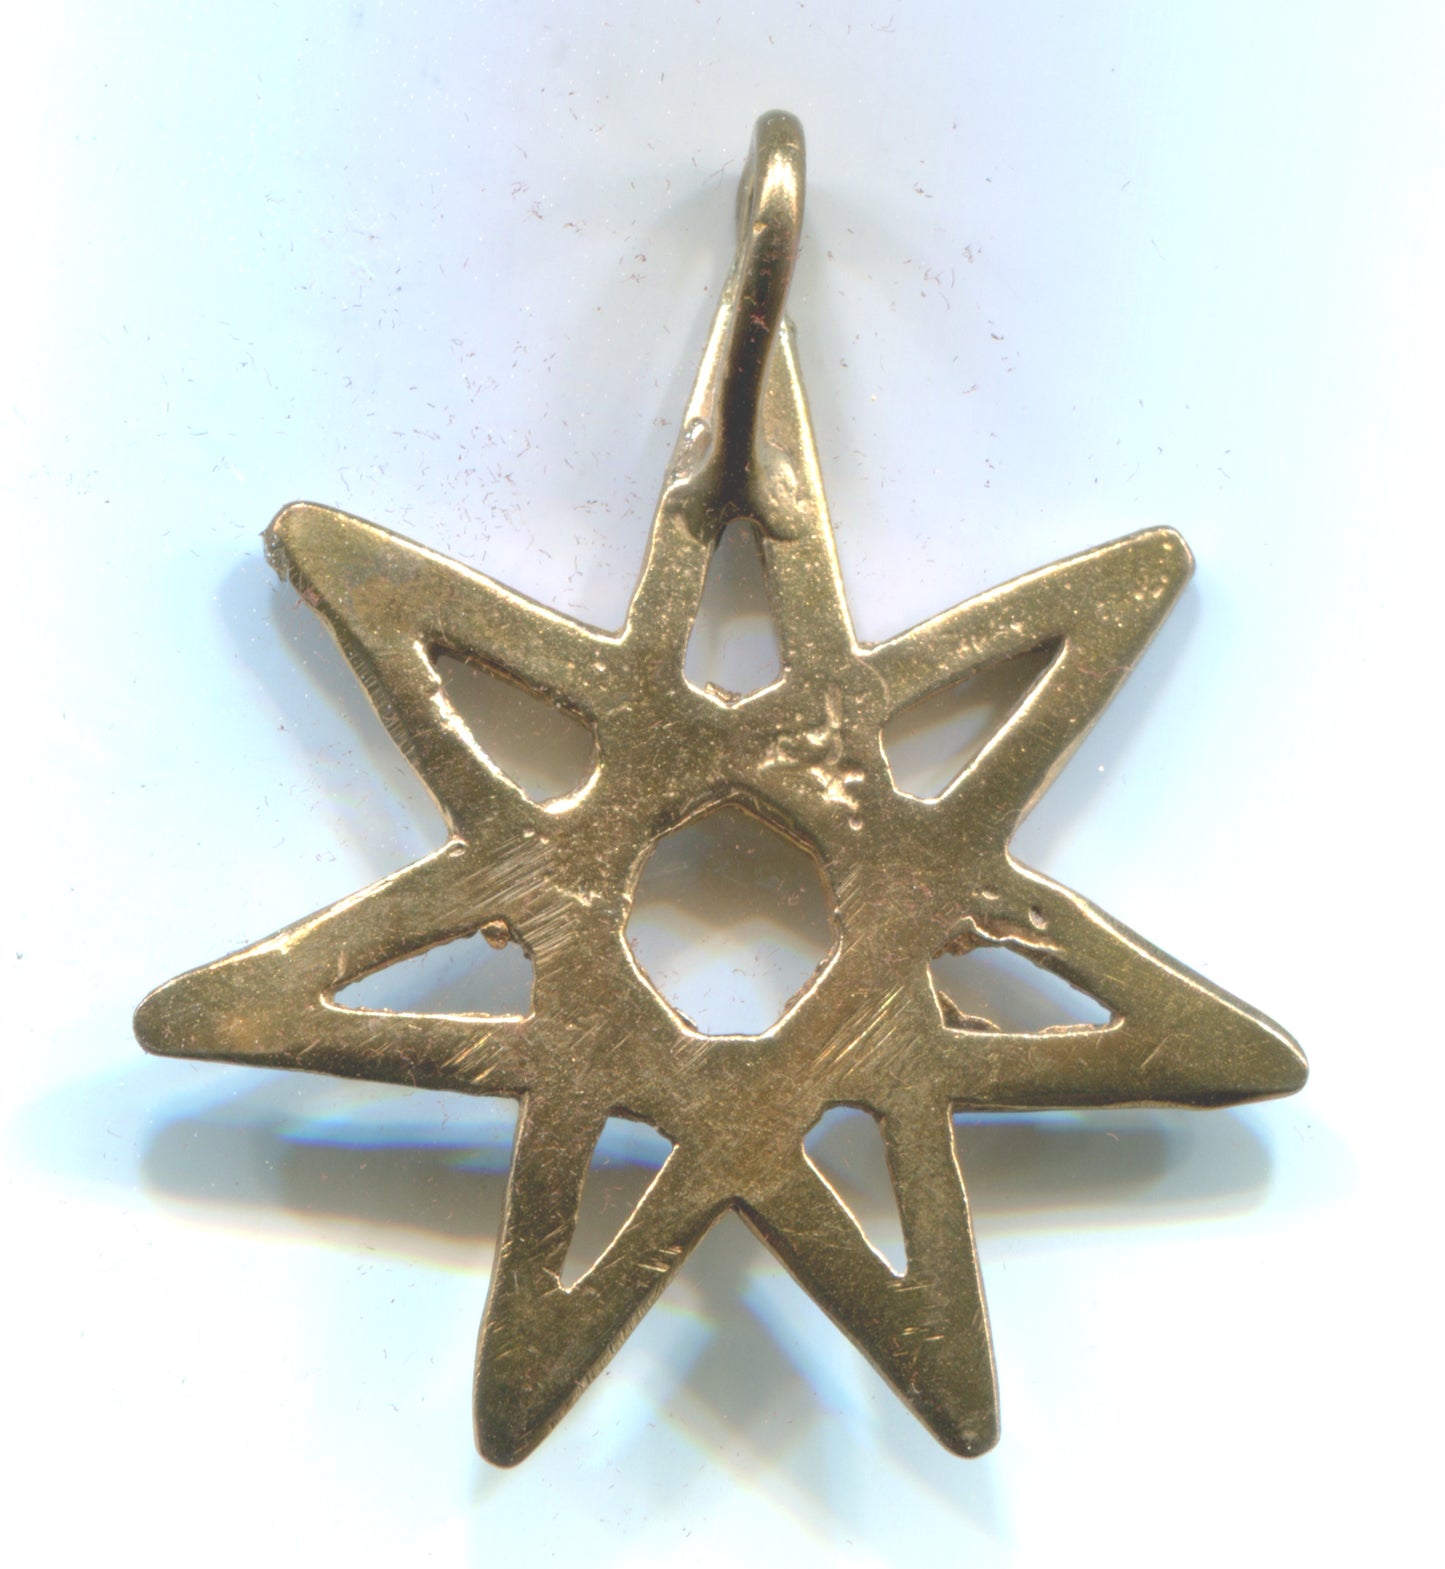 7-pointed Star / Faery Star - large - 2012B